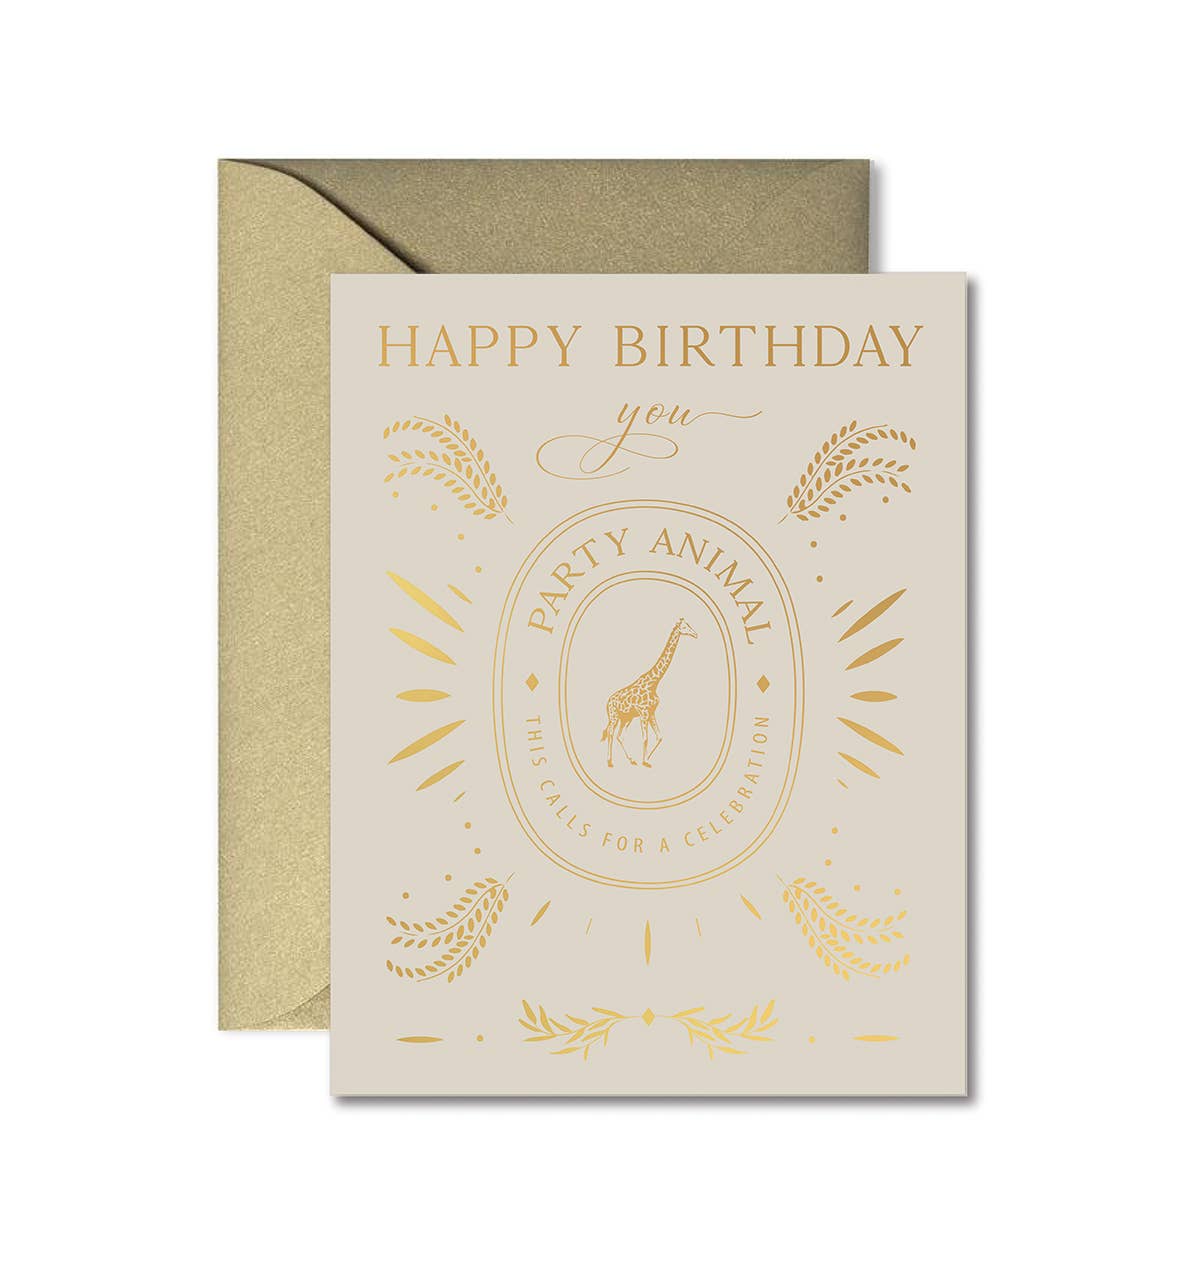 Ginger P. Designs - Party Animal Birthday Greeting Card